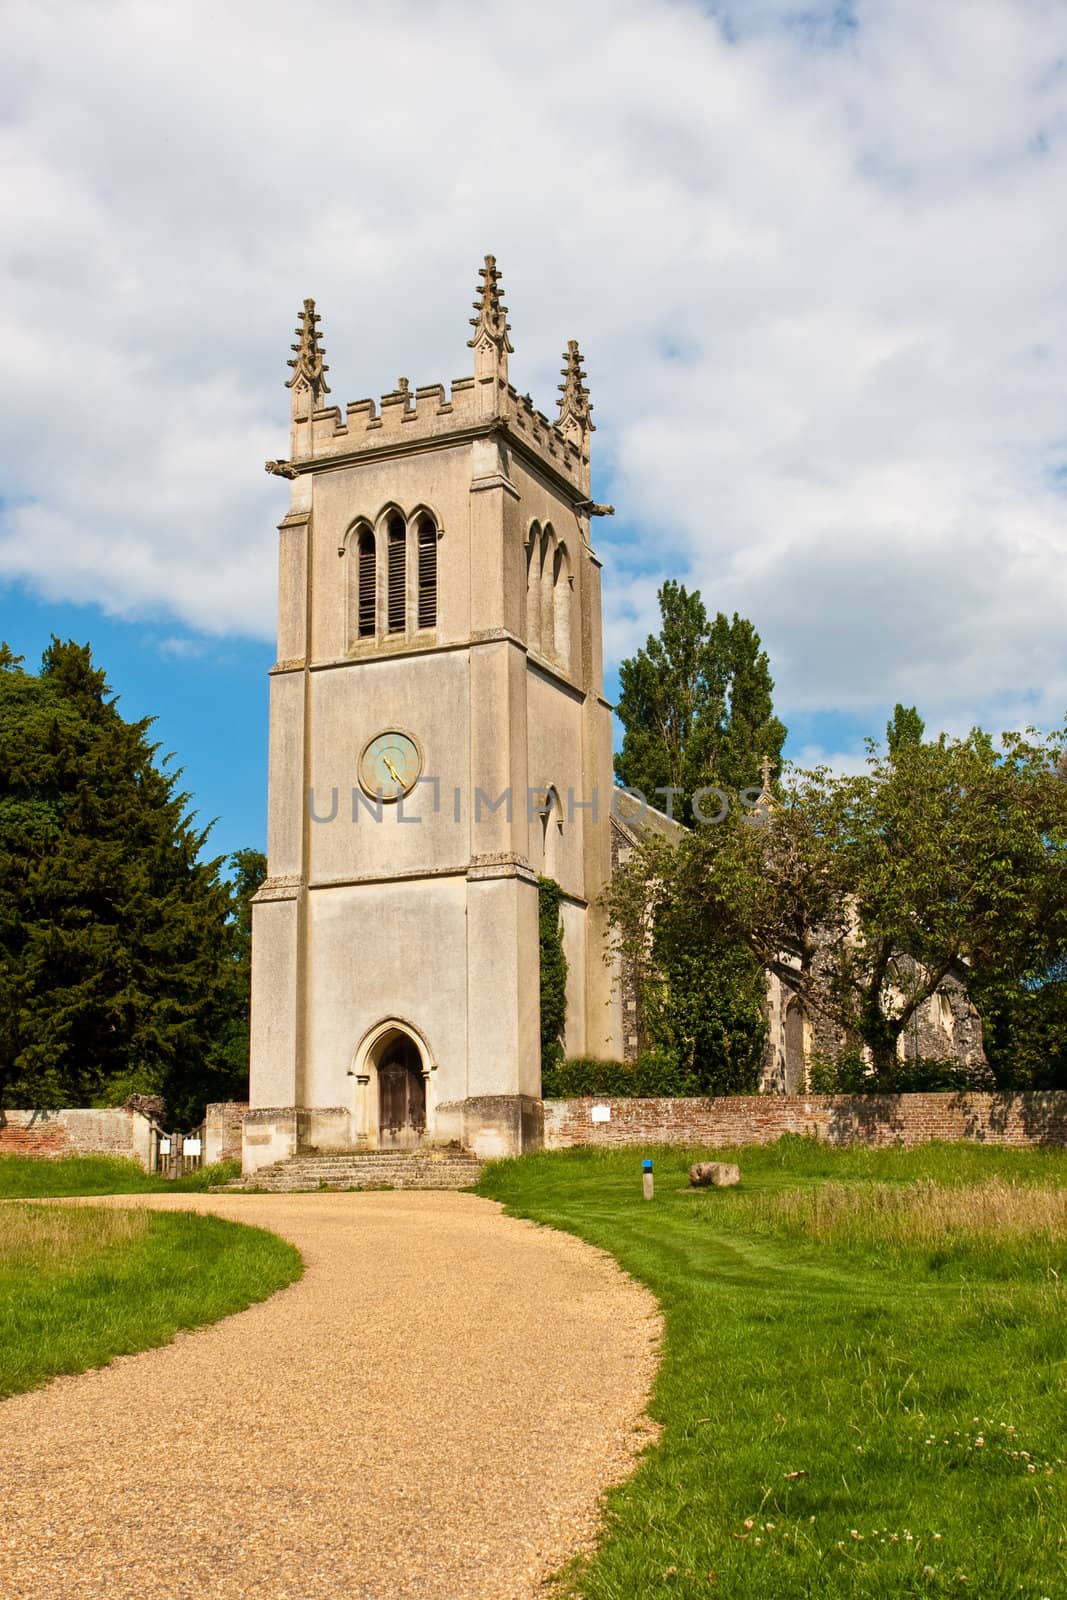 Nice image of an old english church on a summer's day